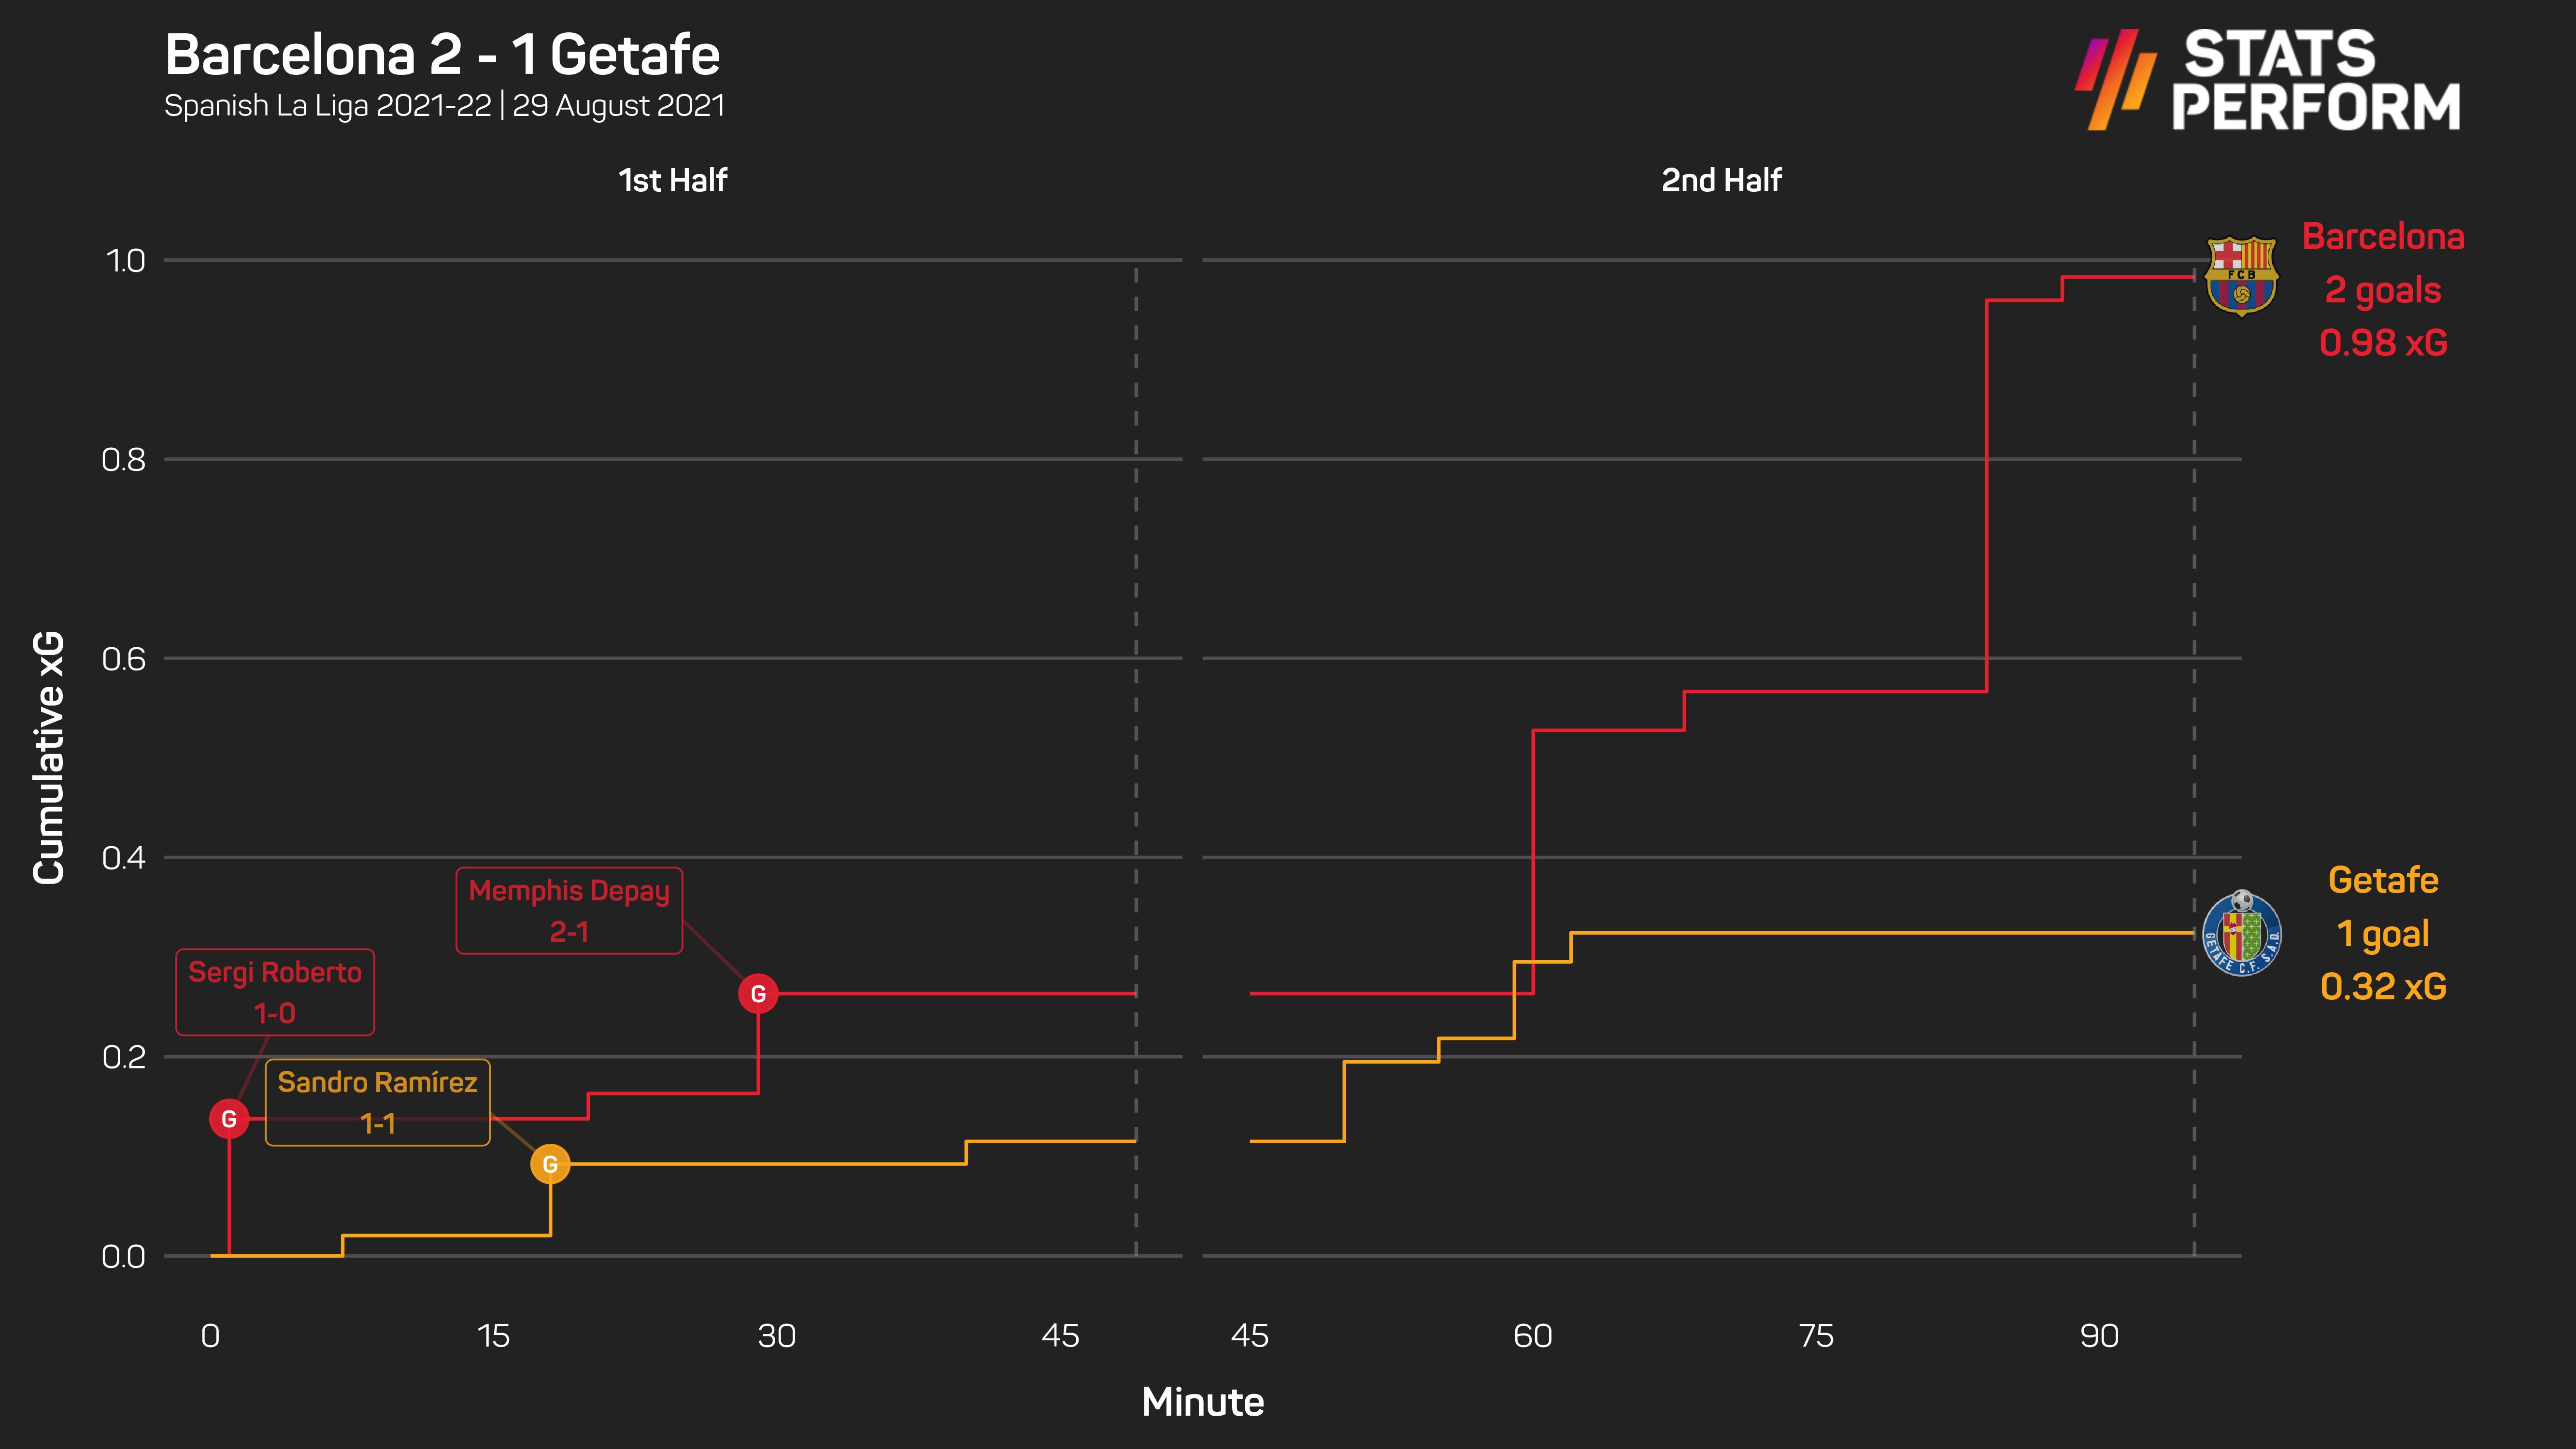 Barcelona edged the expected goals count against Getafe